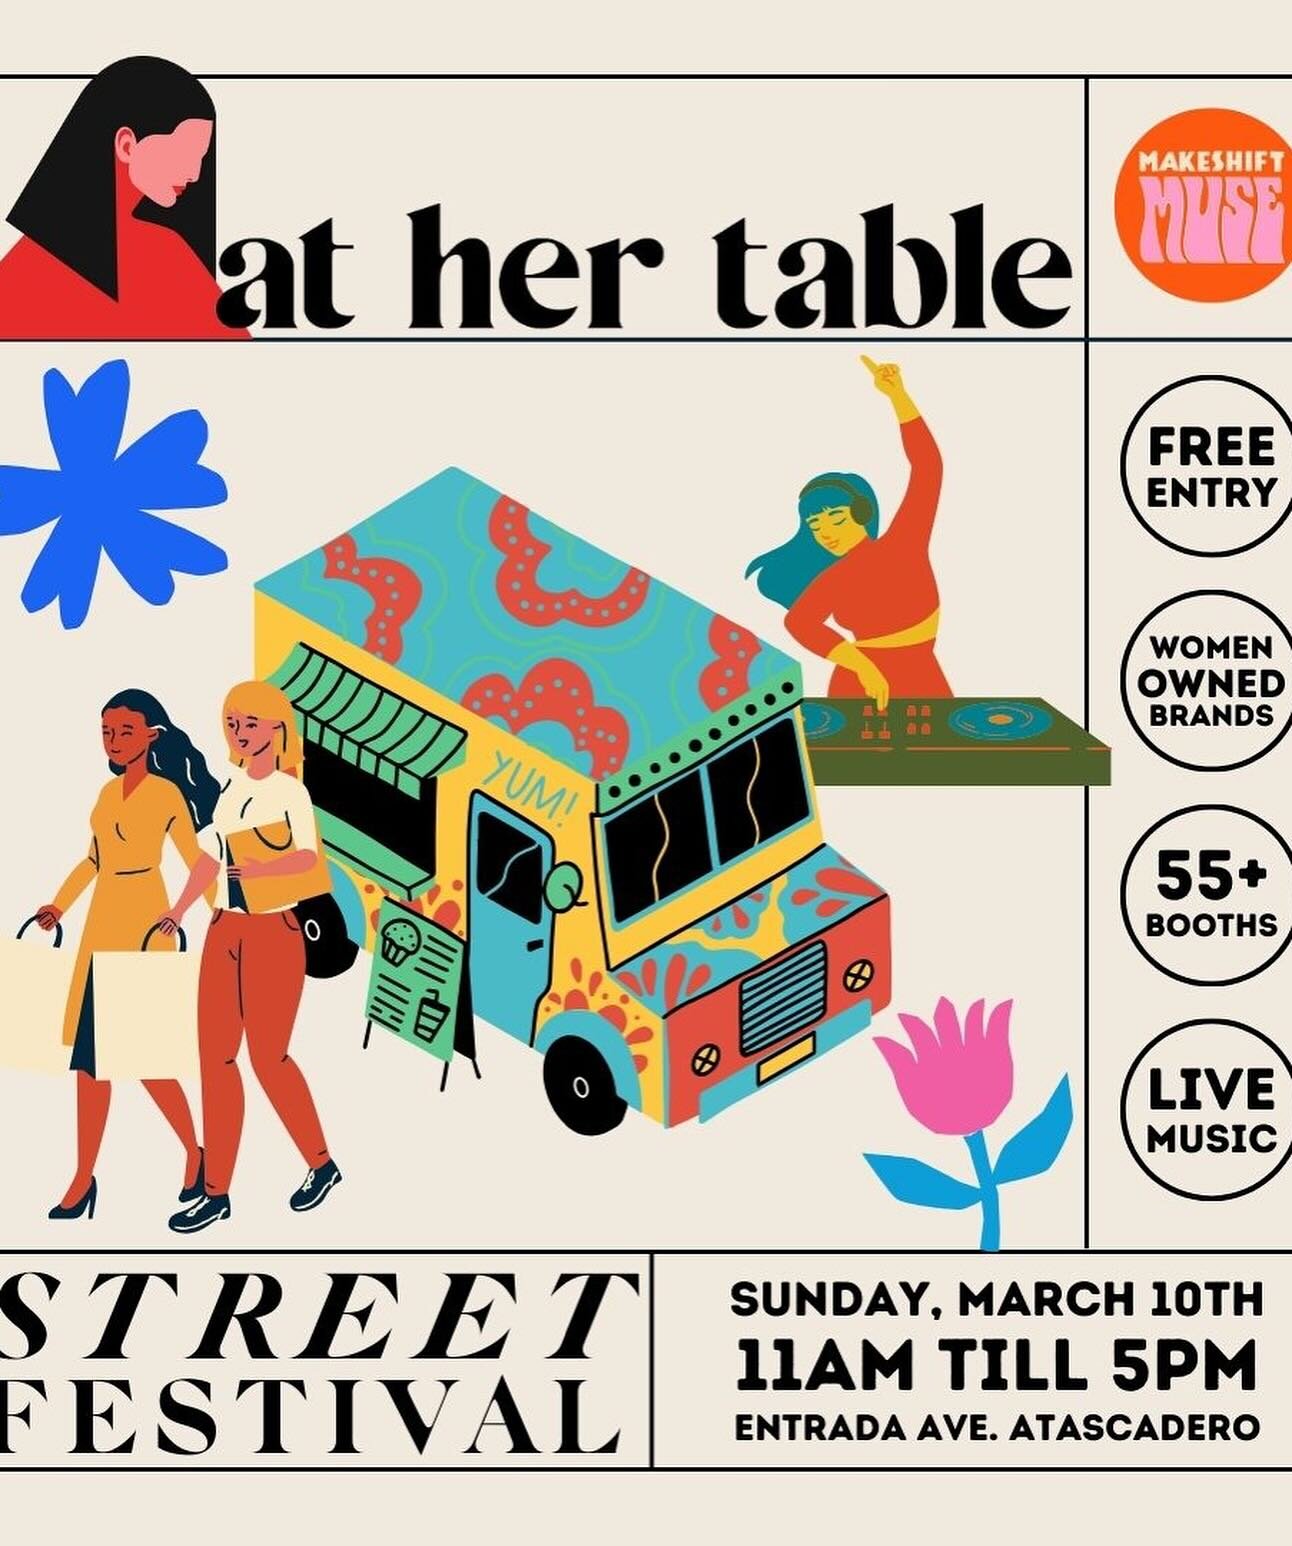 Come celebrate women and support female owned businesses! This Sunday I&rsquo;ll be selling my jams along side @coronafamilyfarms beautiful strawberries at  the At Her Table Street Festival 🍓❤️🍓❤️ it&rsquo;s going to be a beautiful day of celebrati